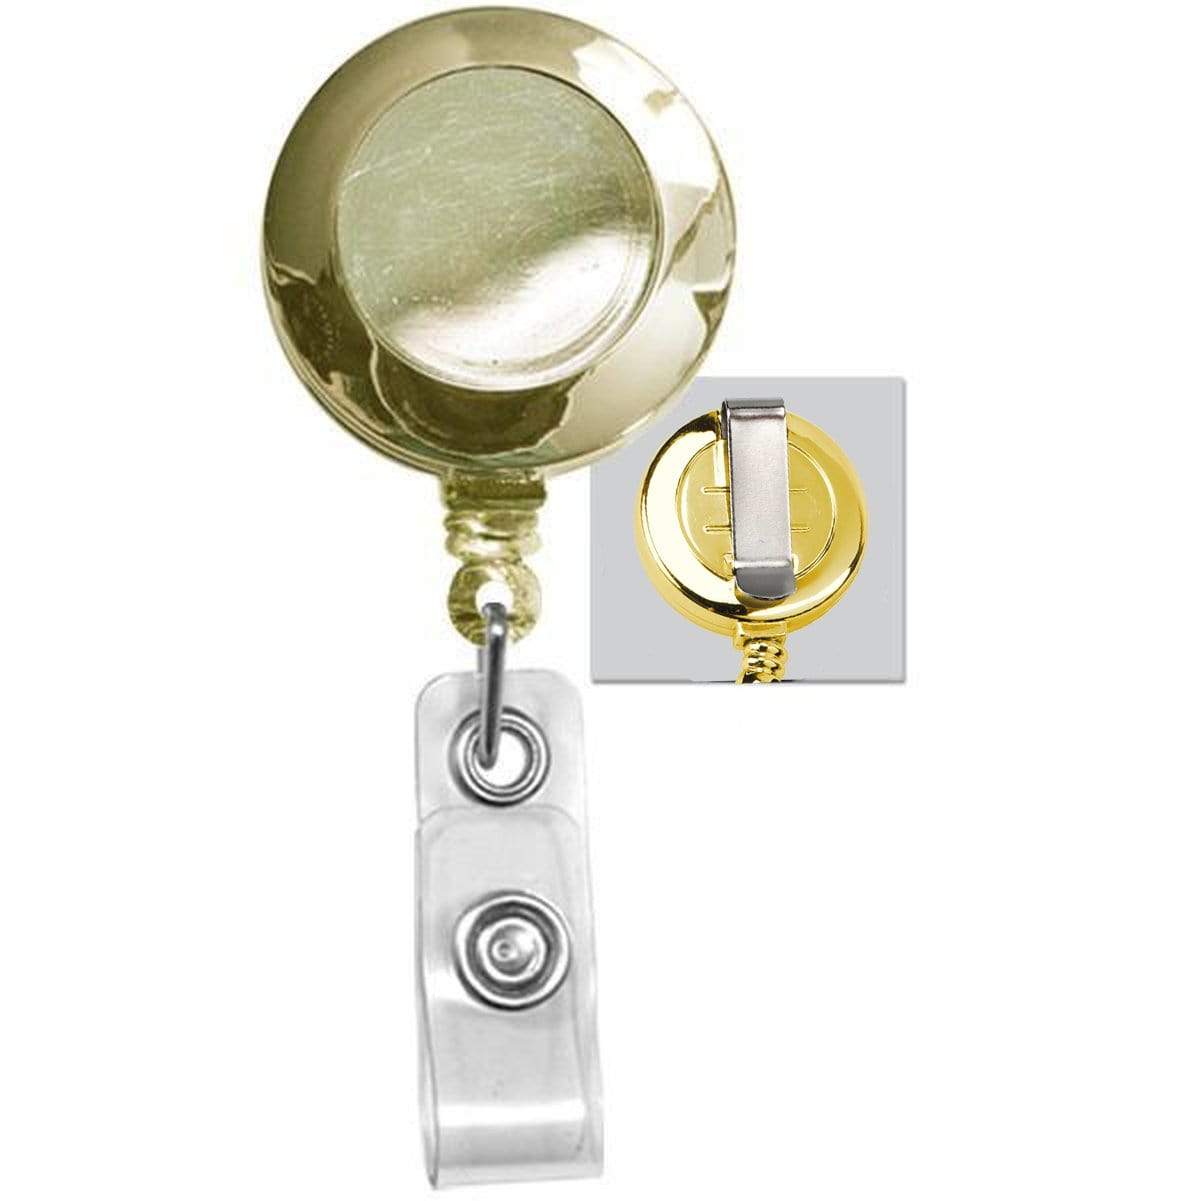 Gold Retractable Badge Reel With Belt Clip (P/N 2120-3035) and